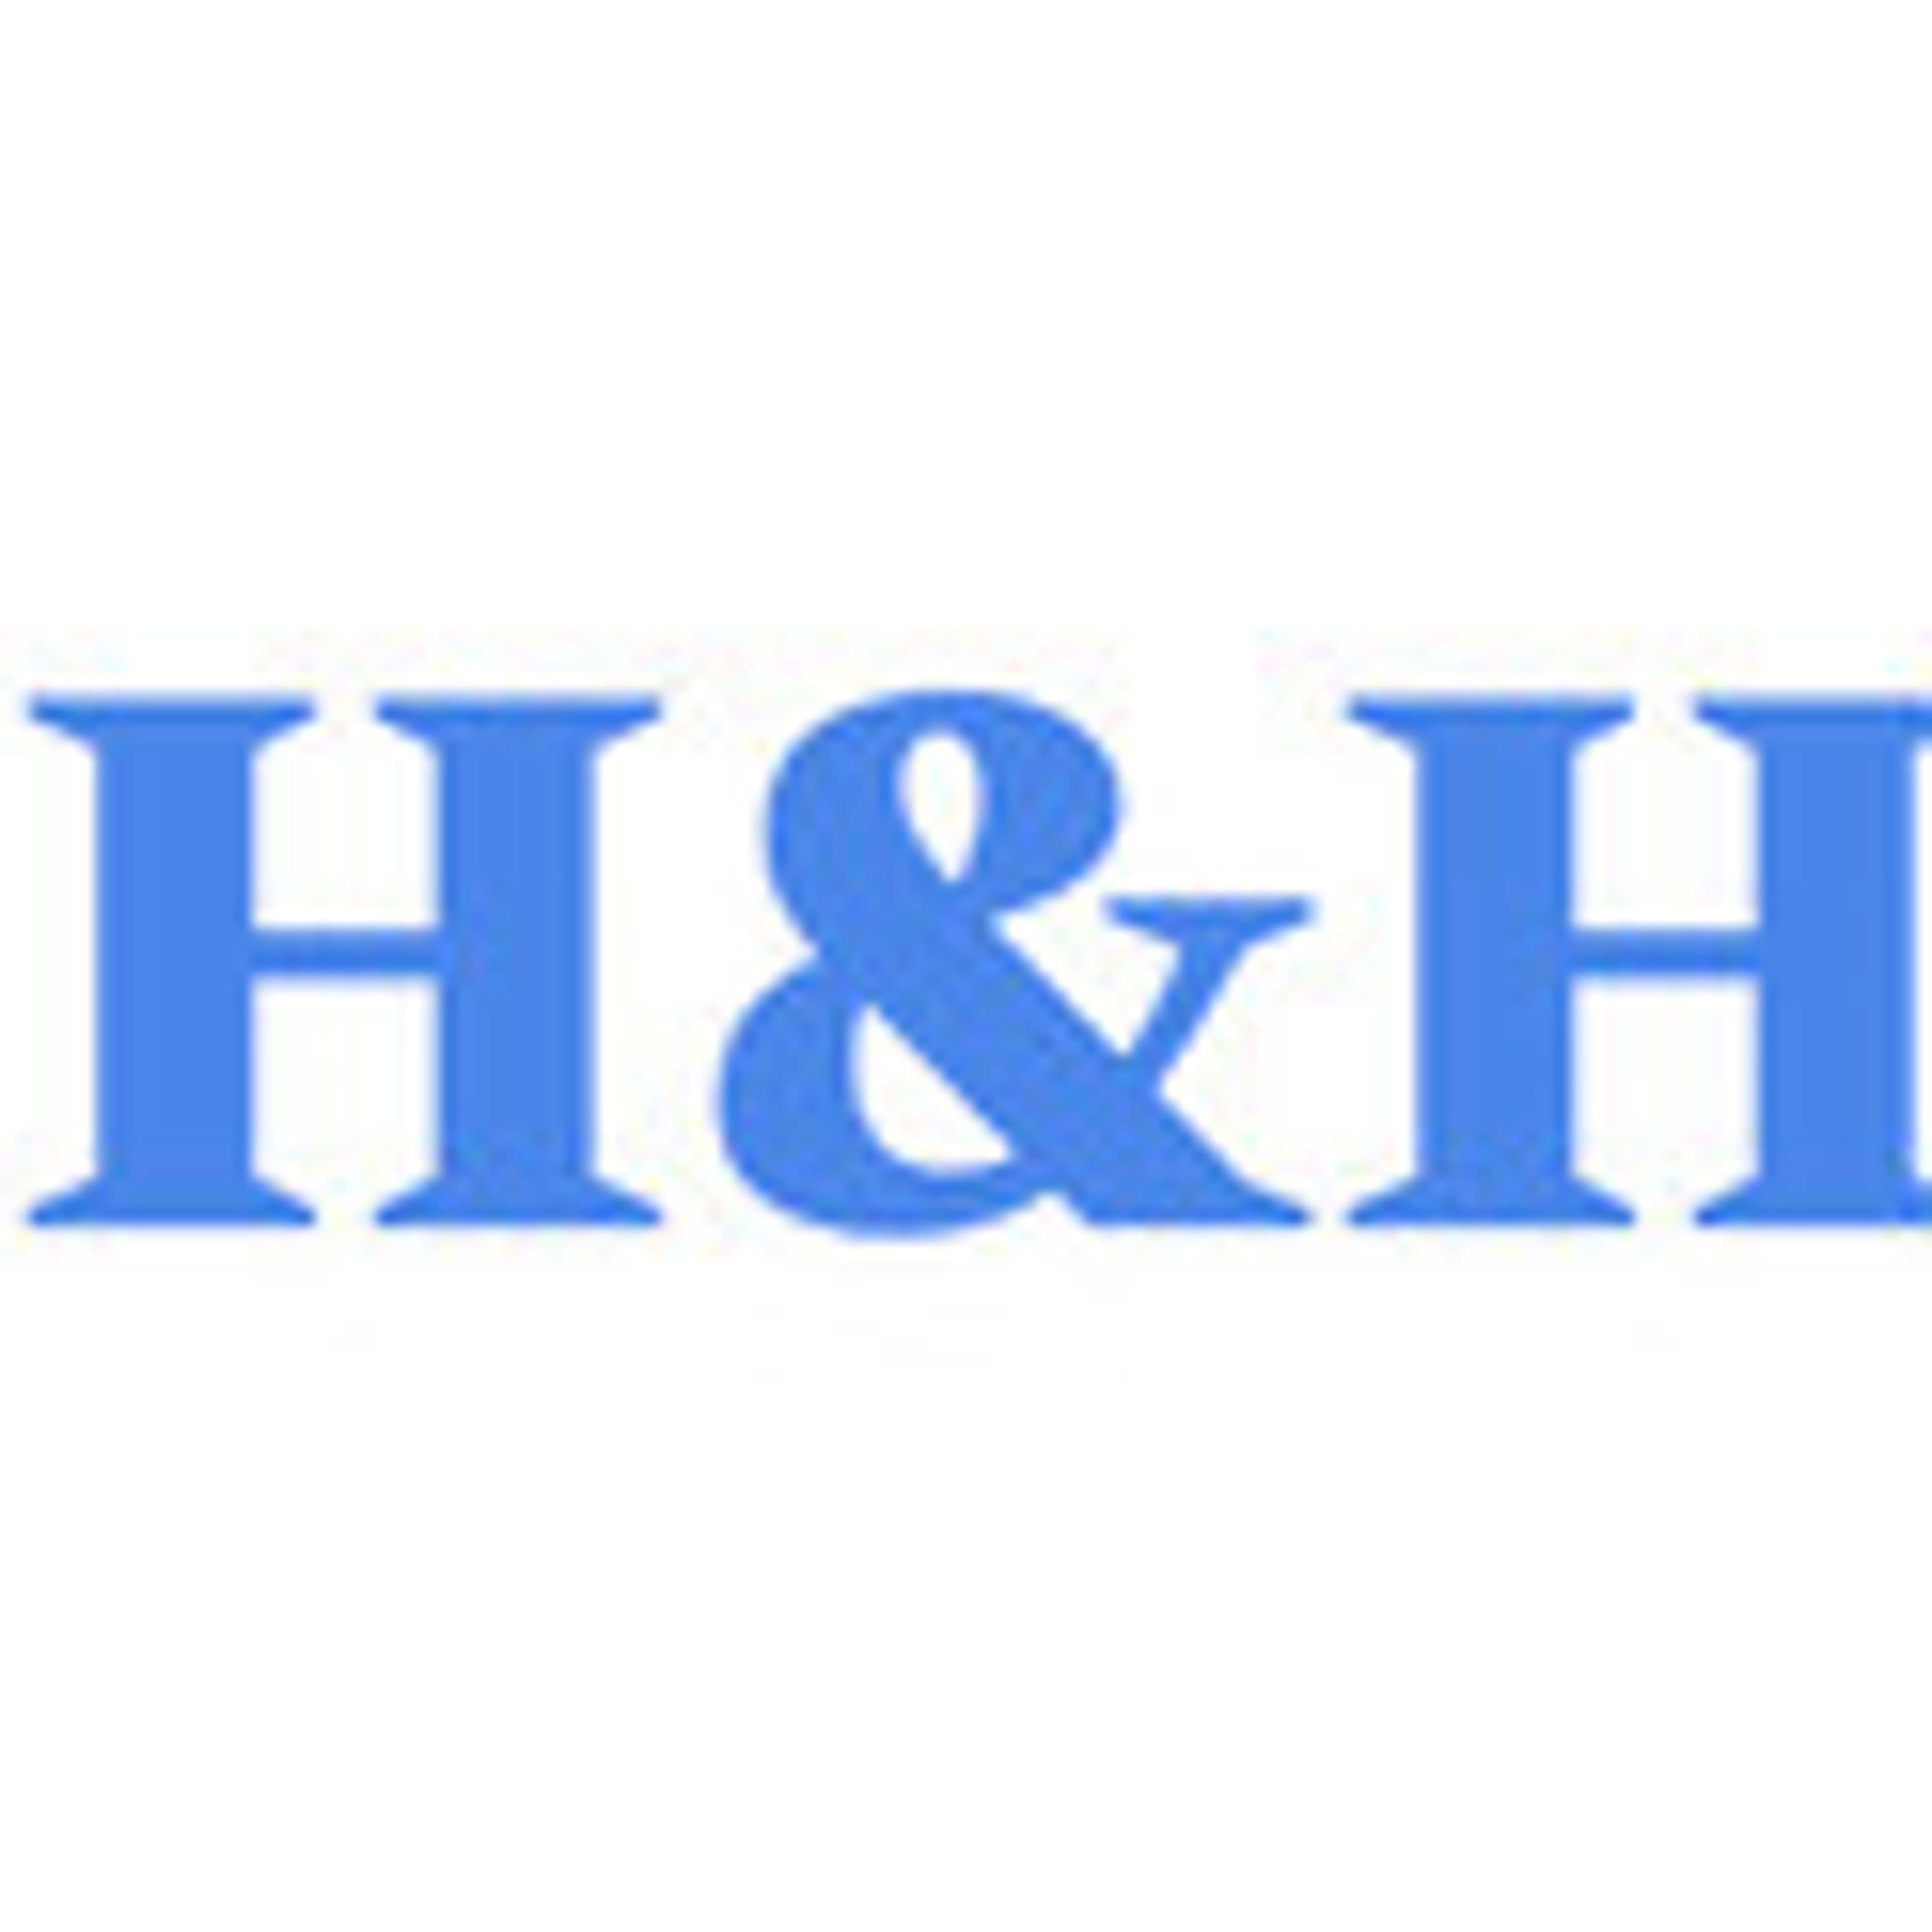 Covered H&H - Nashville's Premier Upscale Residential & Short Term Rental Housekeeping and Caretaking Services